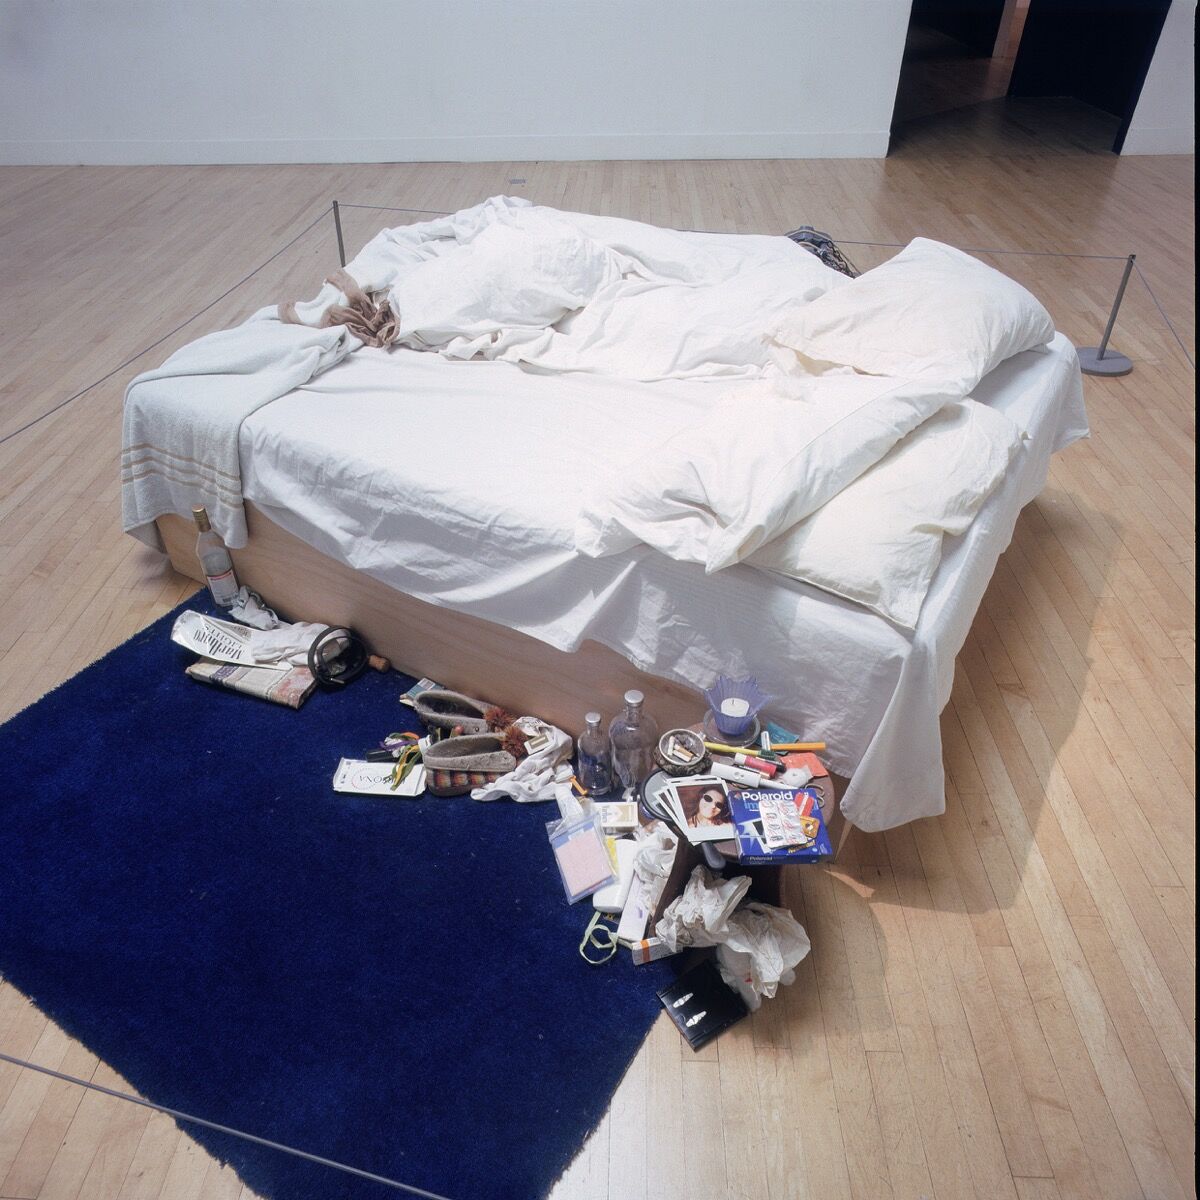 Tracey Emin S My Bed Ignored Society S Expectations Of Women Artsy